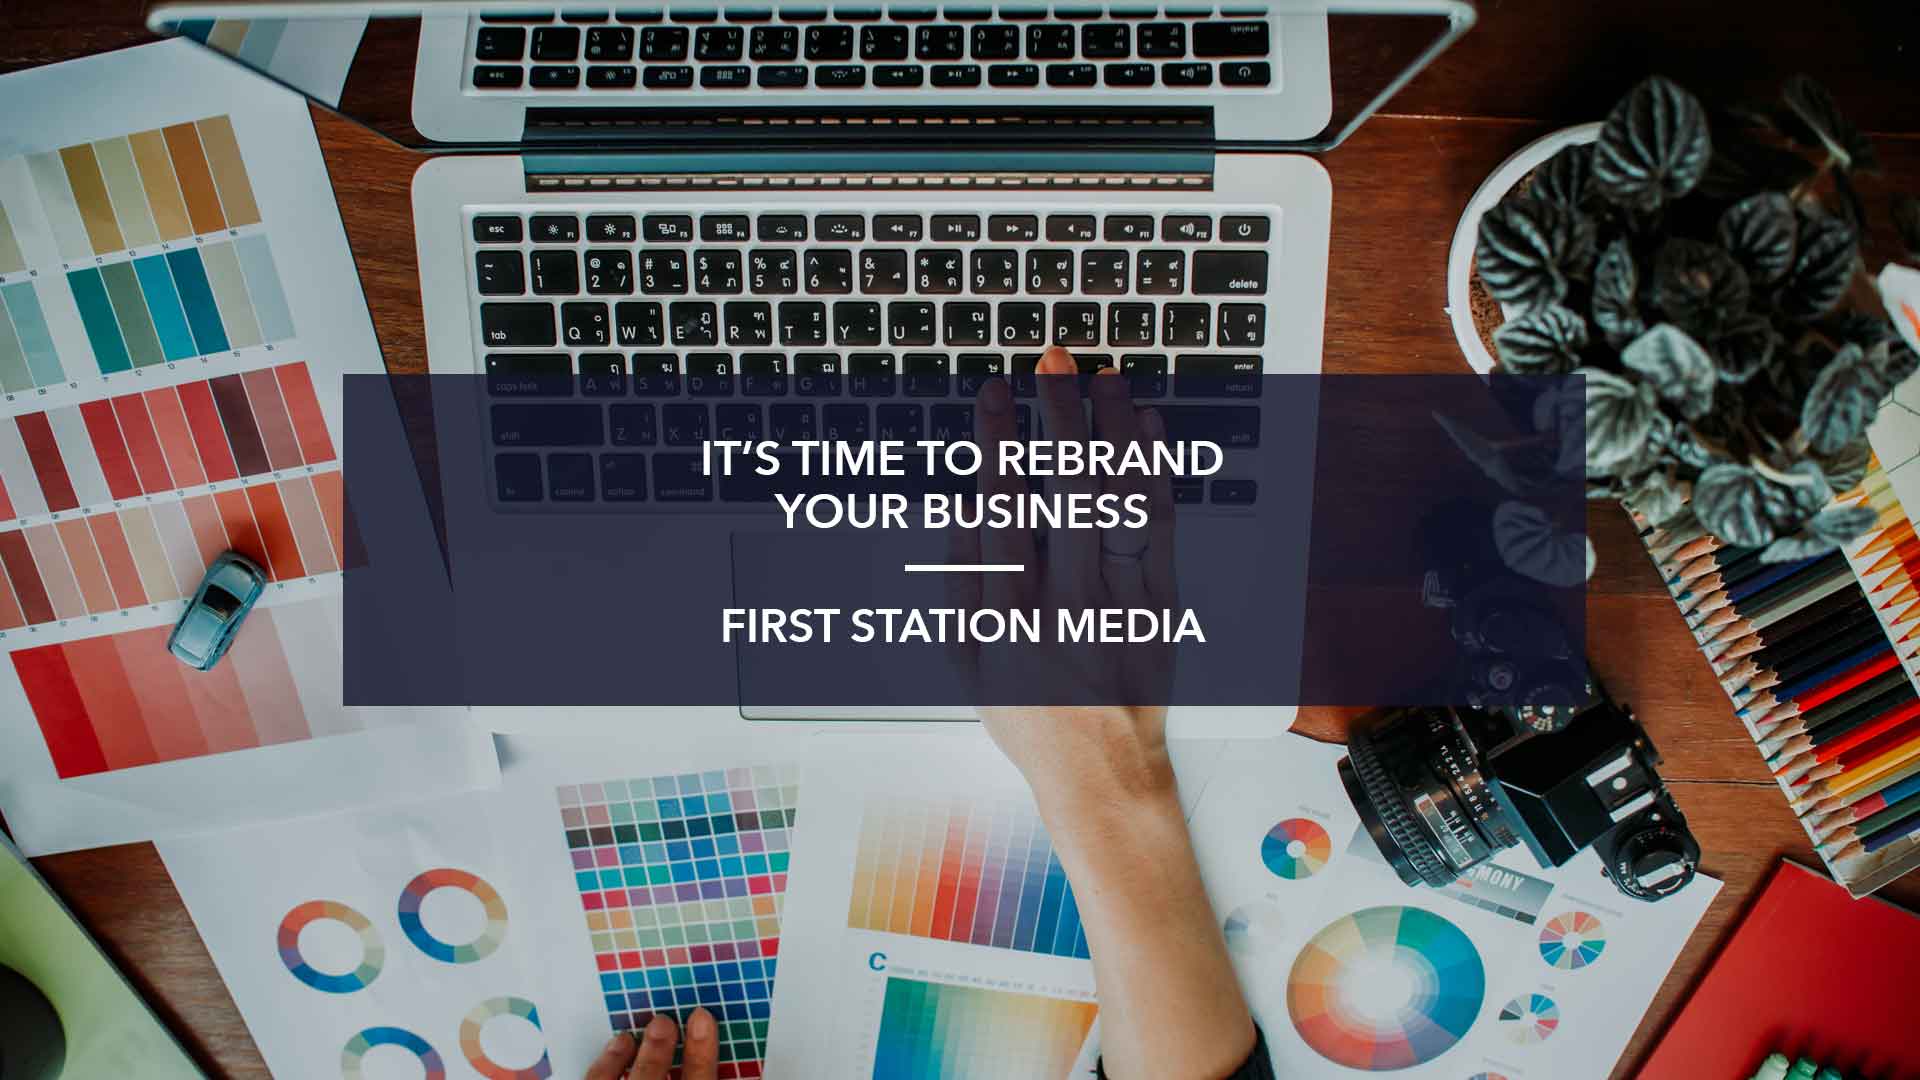 IT'S TIME TO REBRAND YOUR BUSINESS